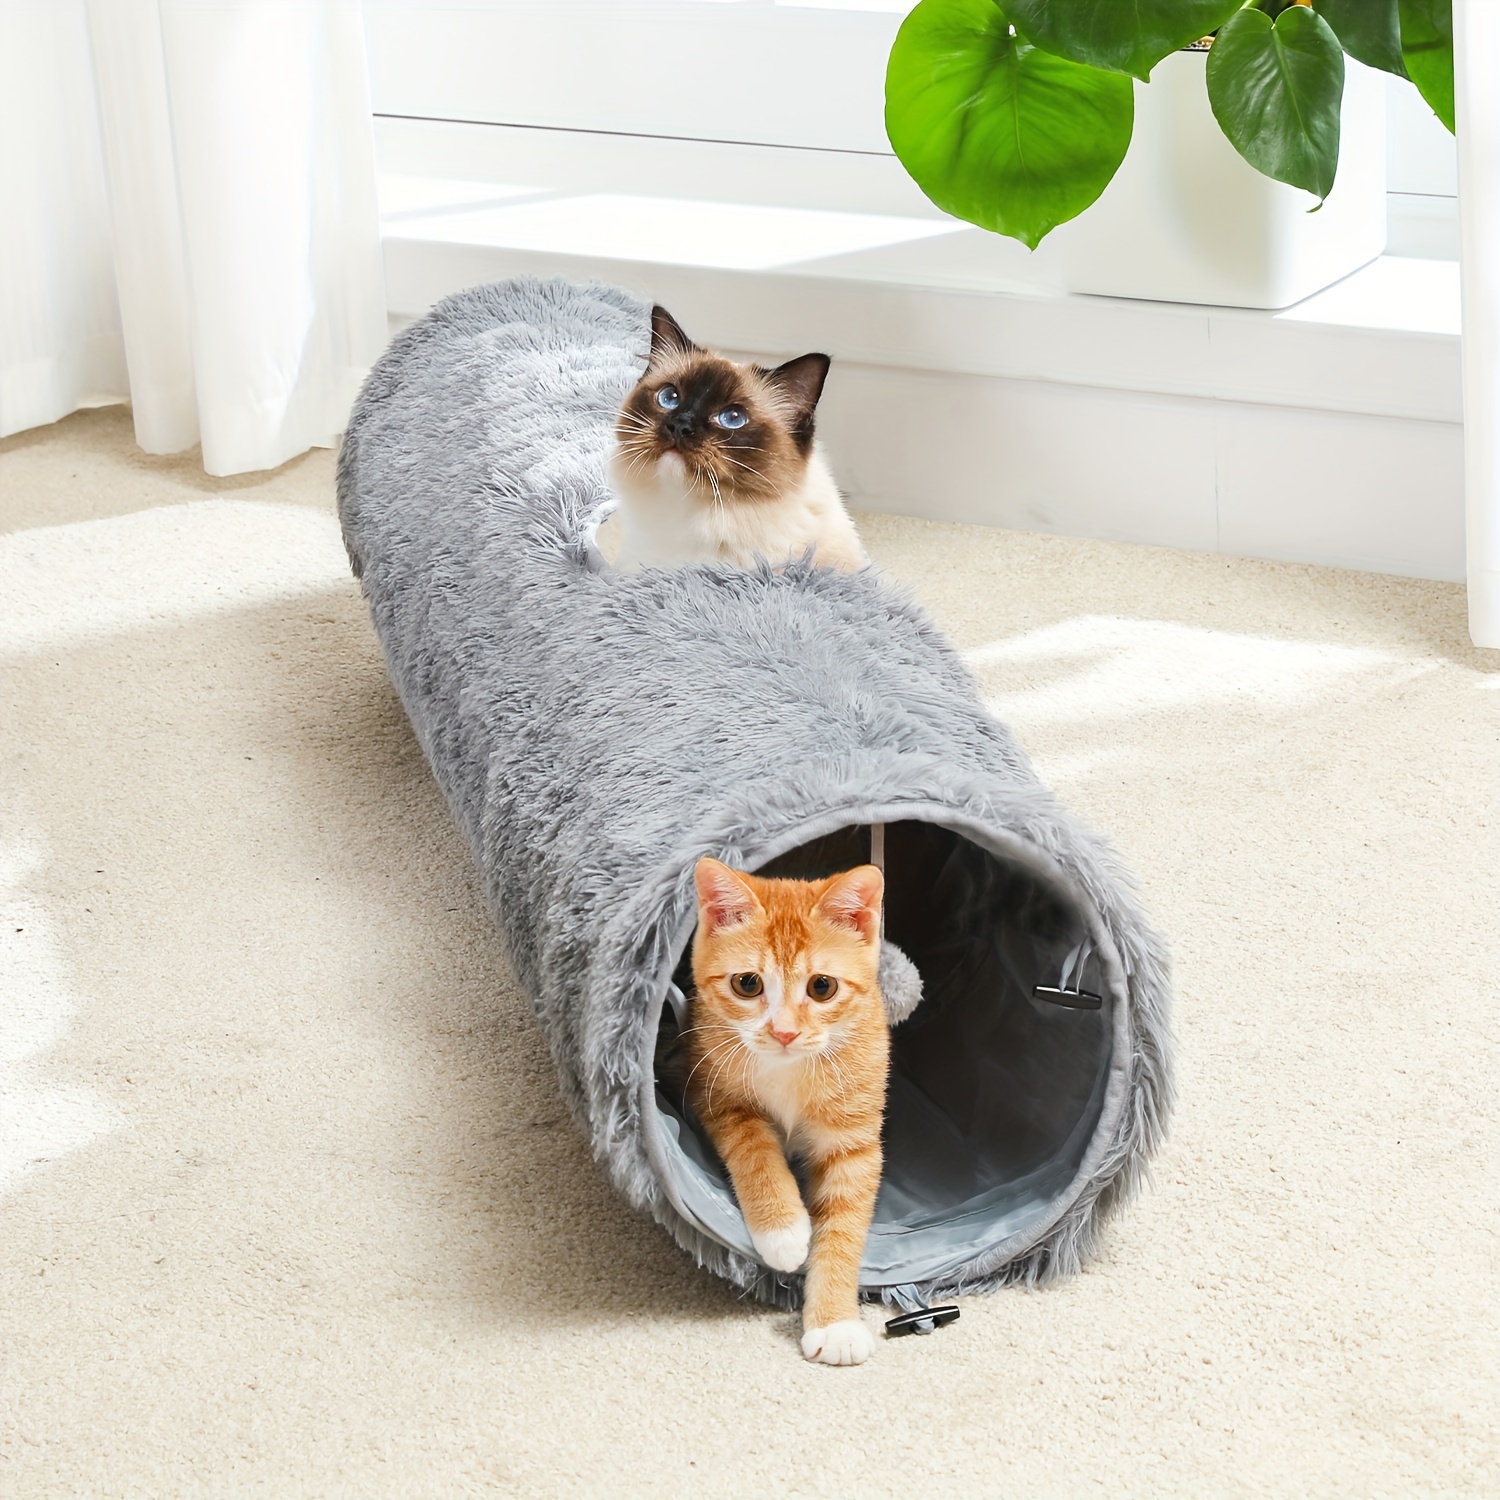 

2pcs Large Plush Cat Tunnel, 44.9 Inches Long Collapsible Cat Tube 9.8 Inches In Diameter, Collapsible Fluffy Plush Cat Toys For Indoor Cat, Rabbits And Puppies